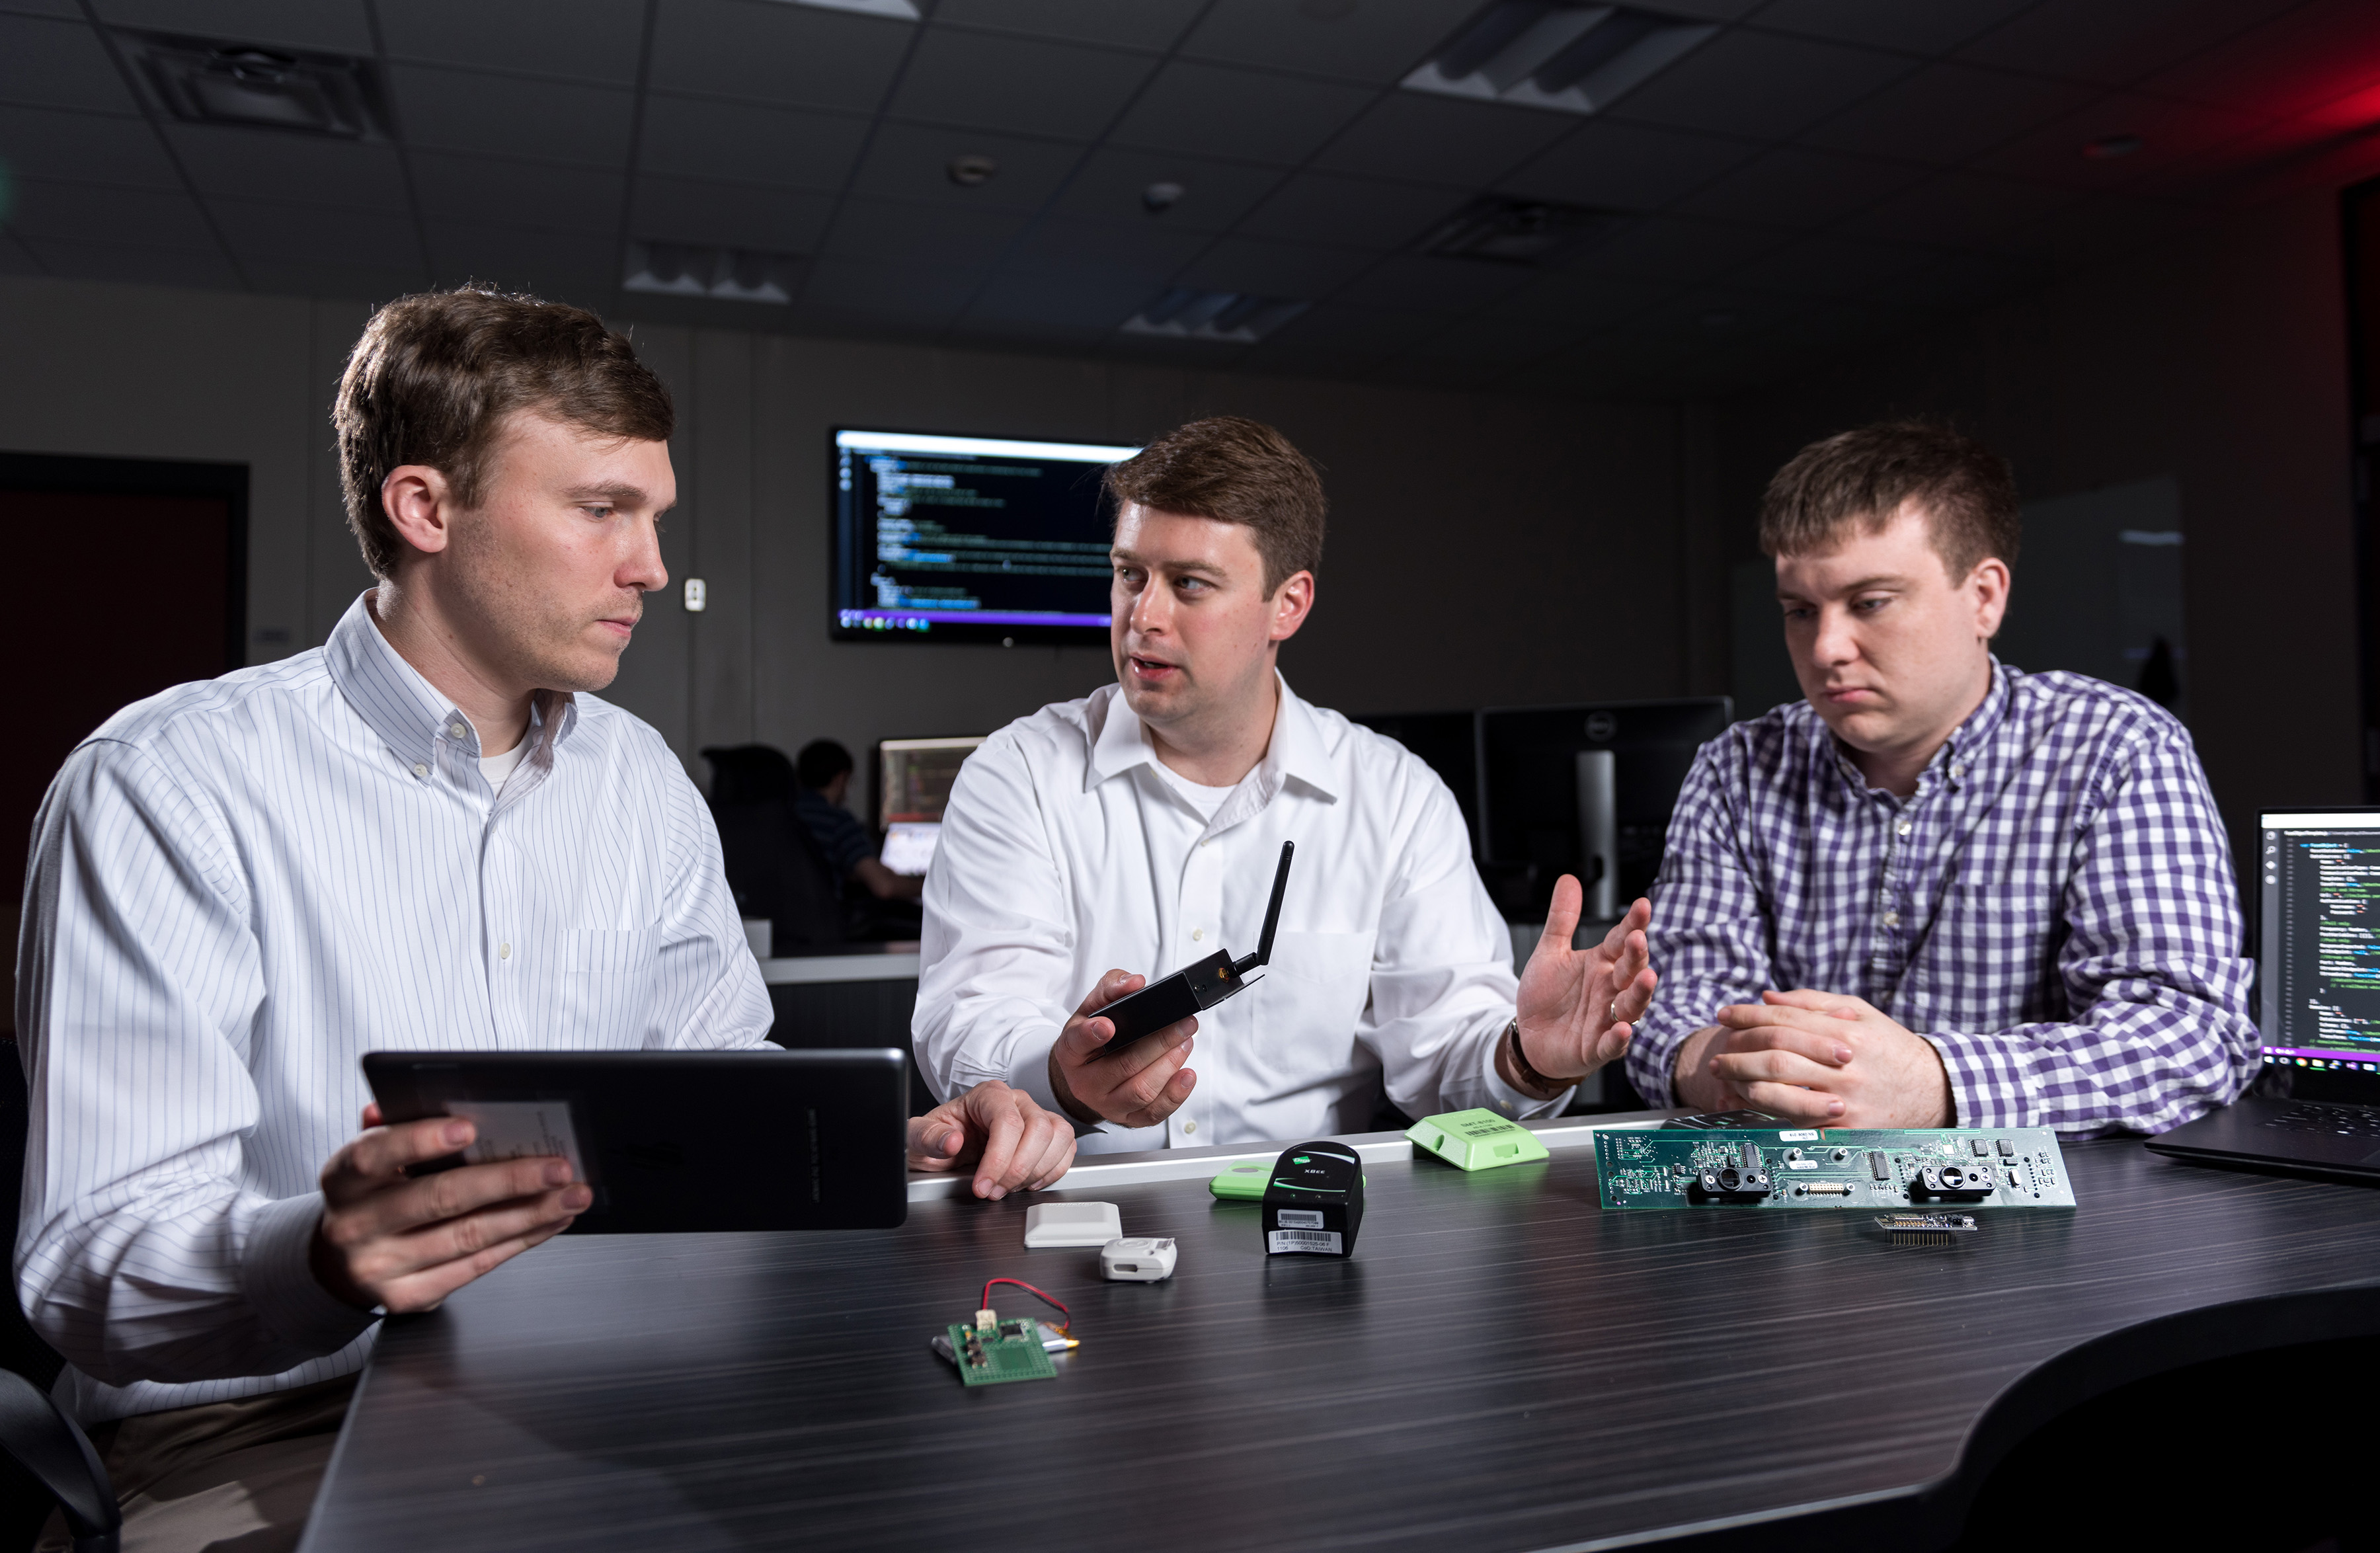 three researchers with internet of things devices